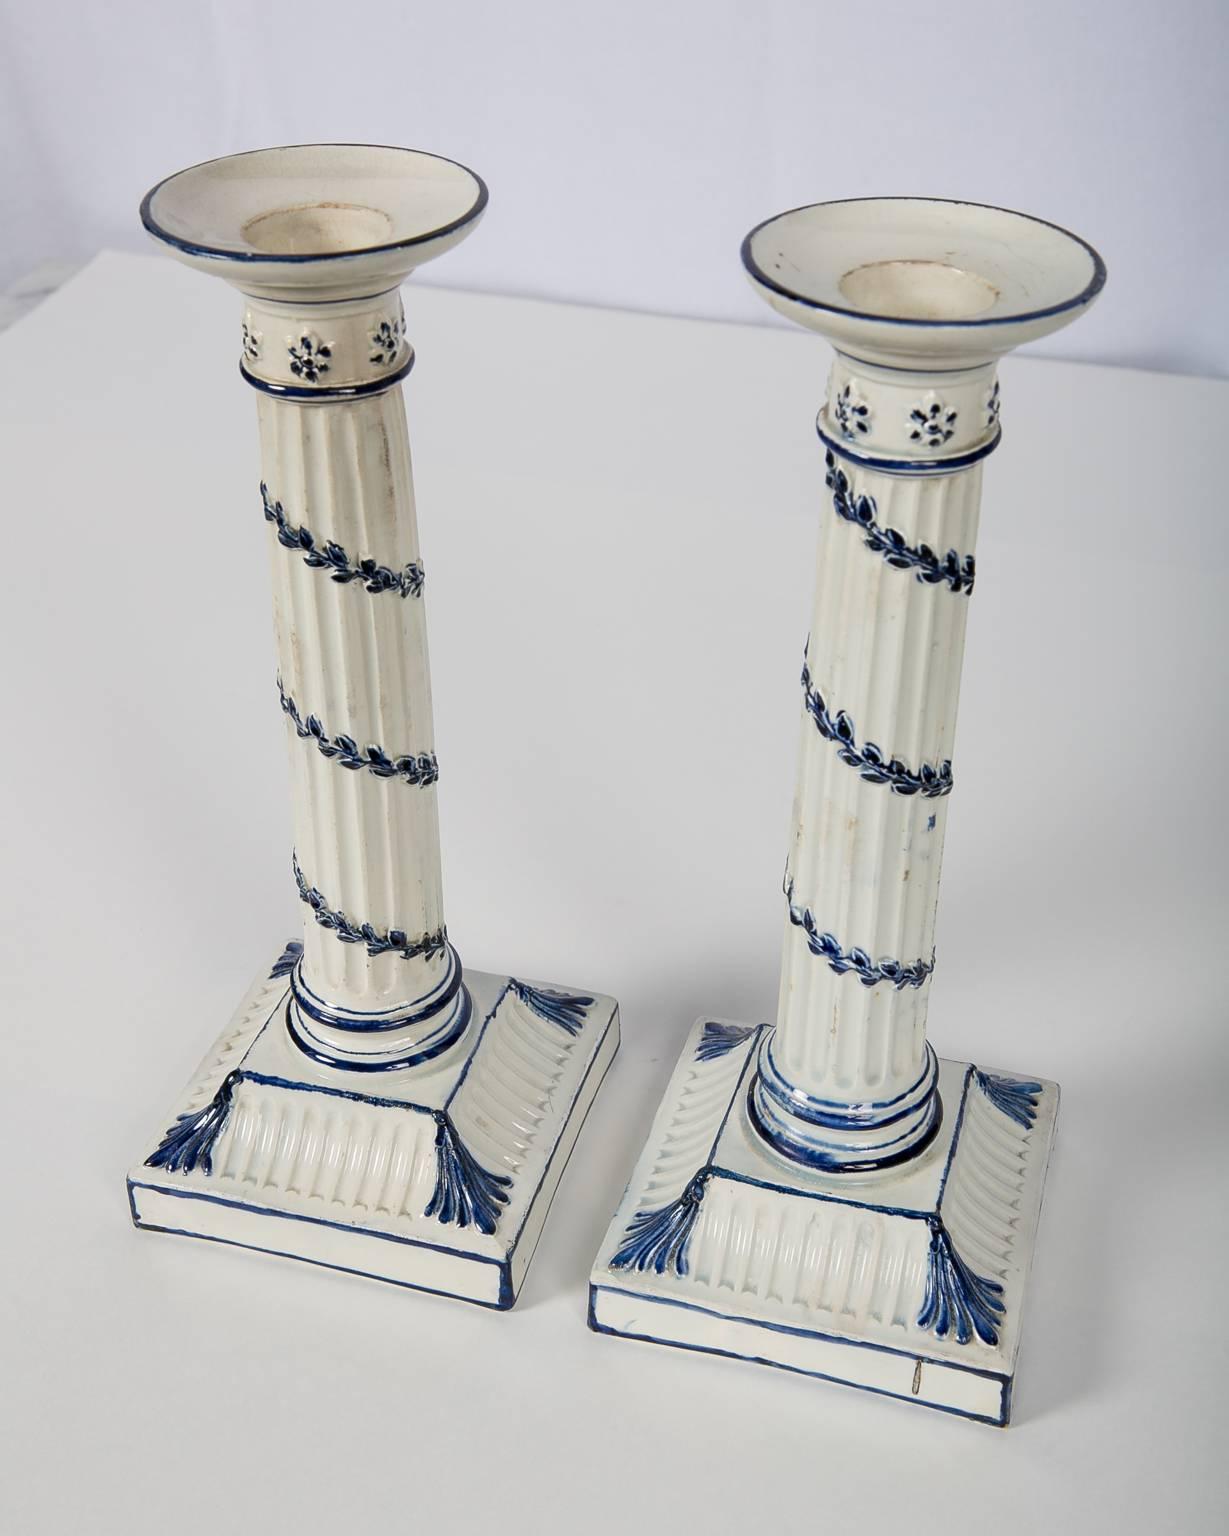 Painted Wedgwood Blue and White Candlesticks with Neoclassical Design